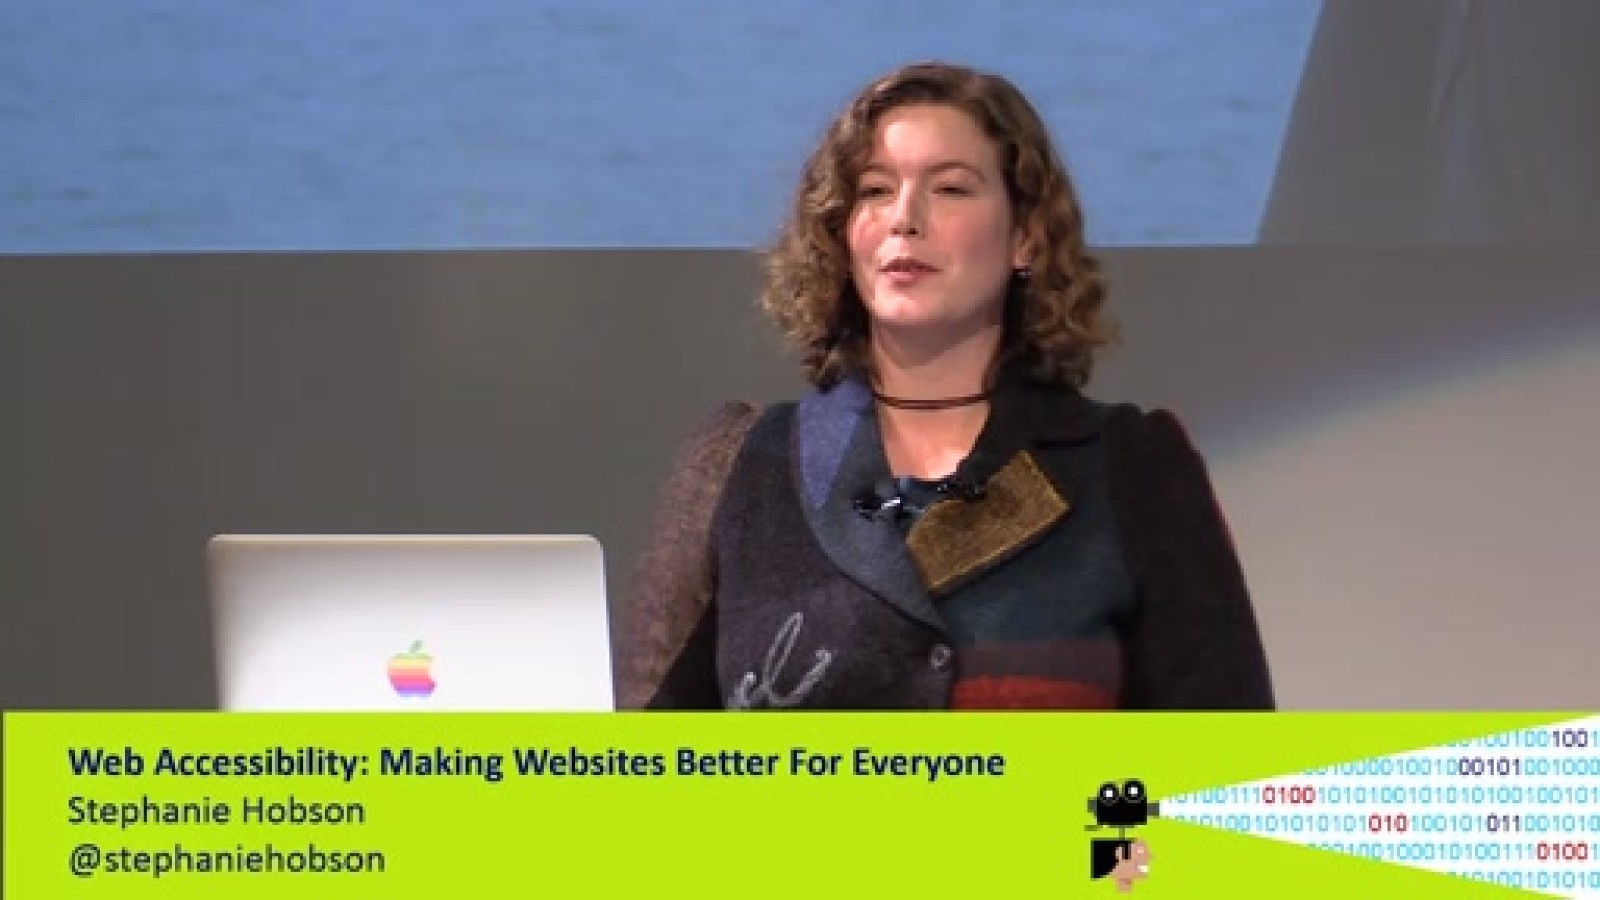 Keynote: Web Accessibility: Making Websites Better For Everyone